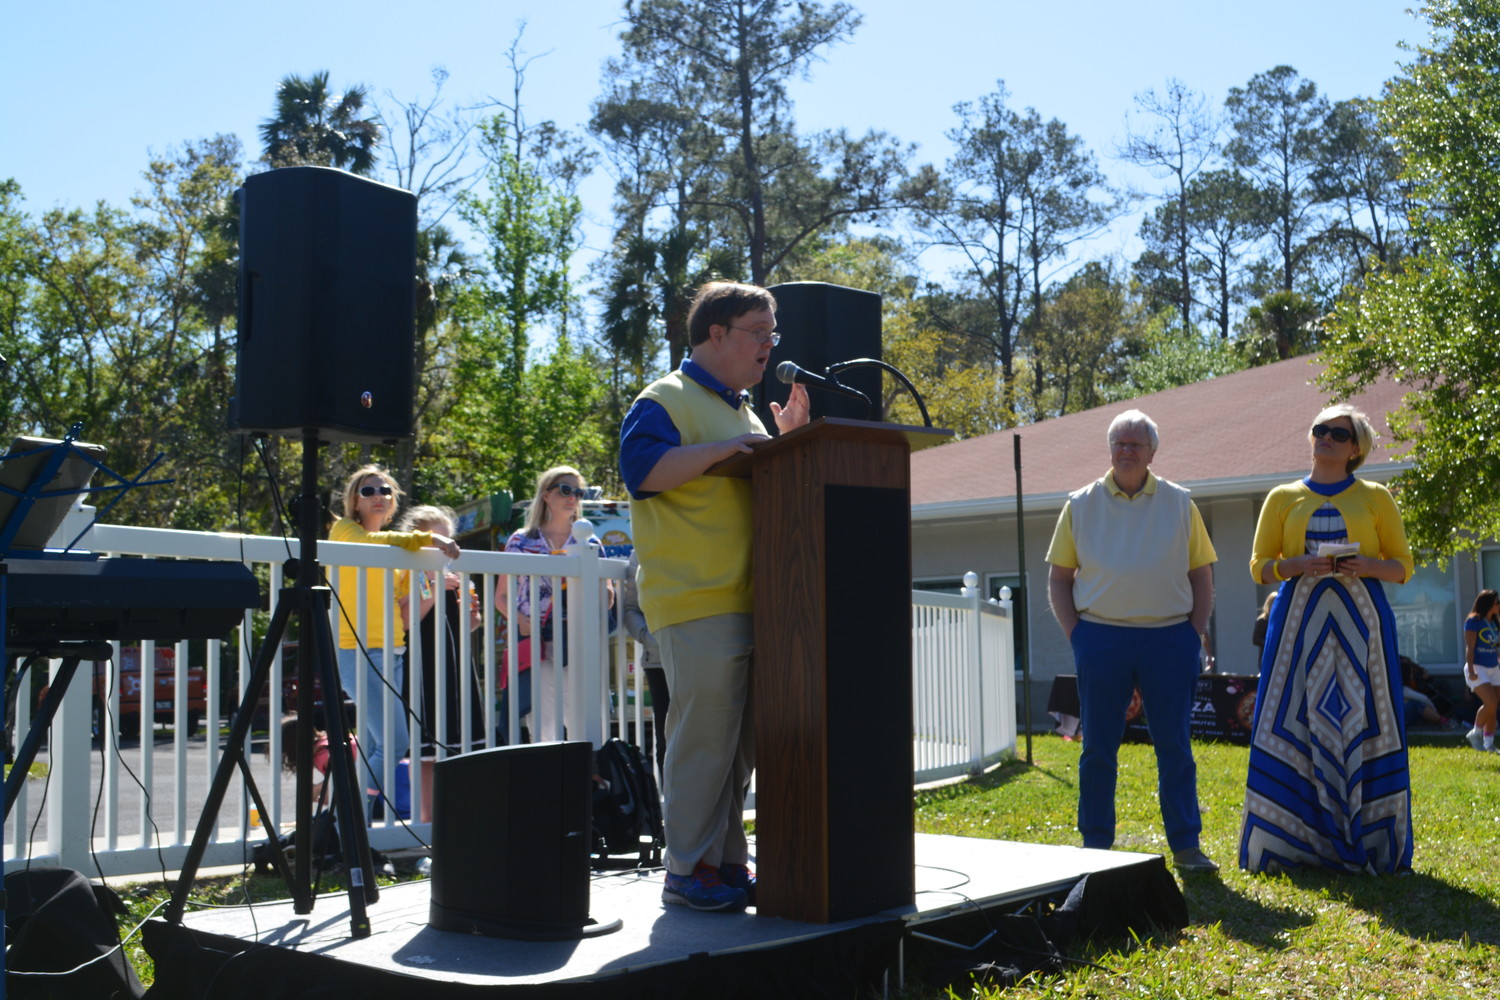 John Franklin Stephens delivers a speech at the 321 Love Your Neighbor event March 21 hosted by the Tesori Family Foundation and Collage Day School.